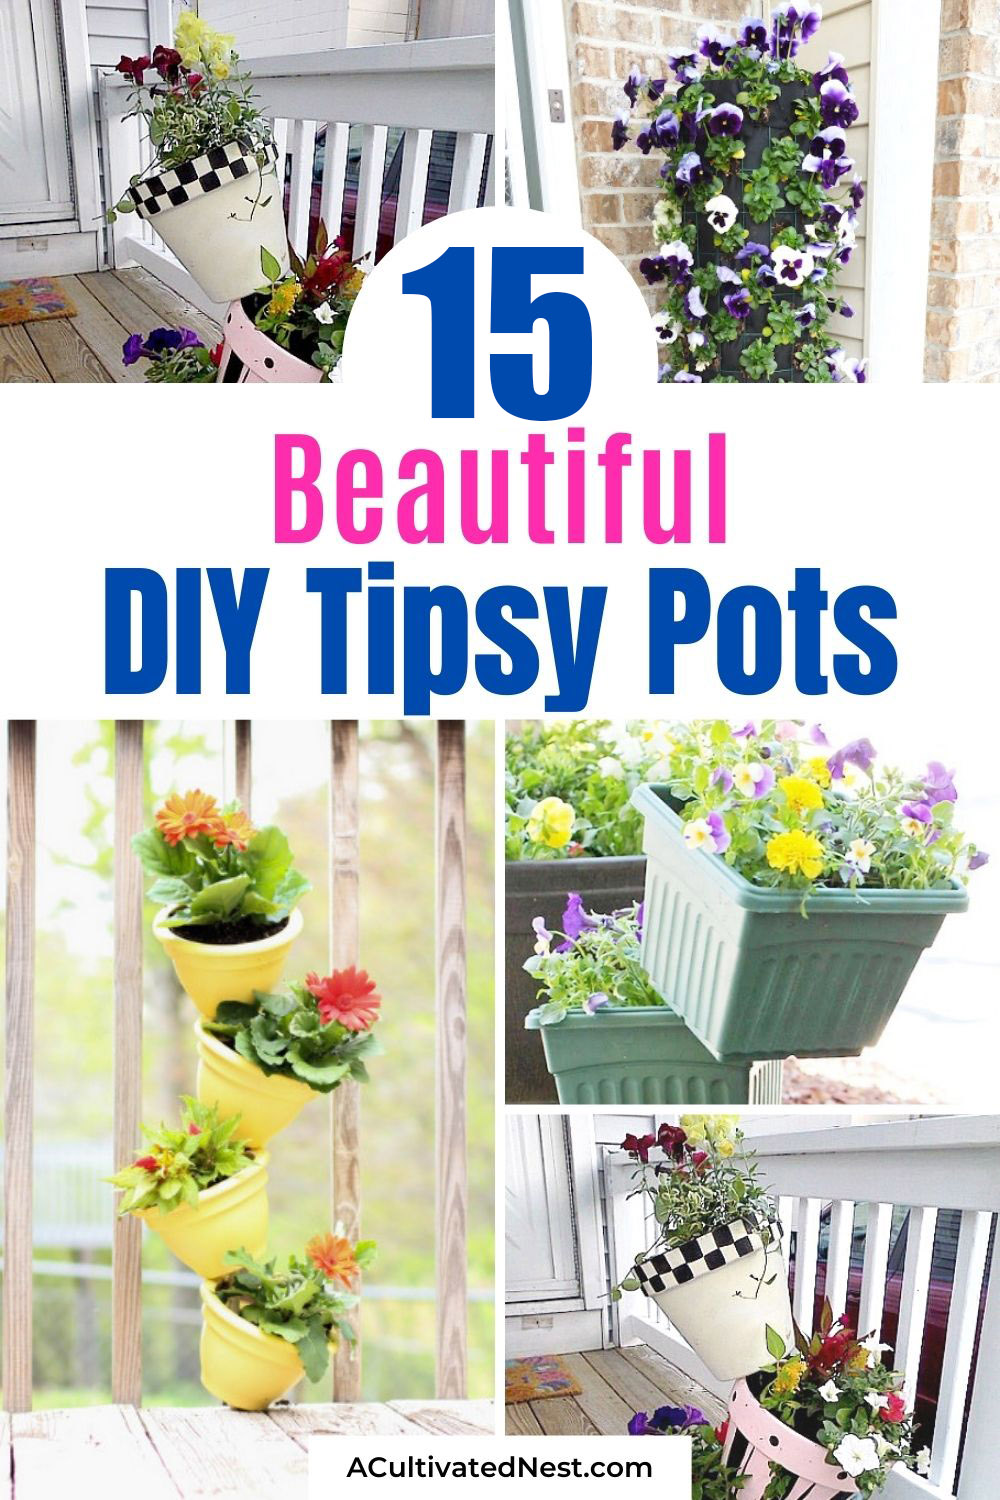 15 Amazing Flower Towers or Tipsy Pot Planters Ideas!